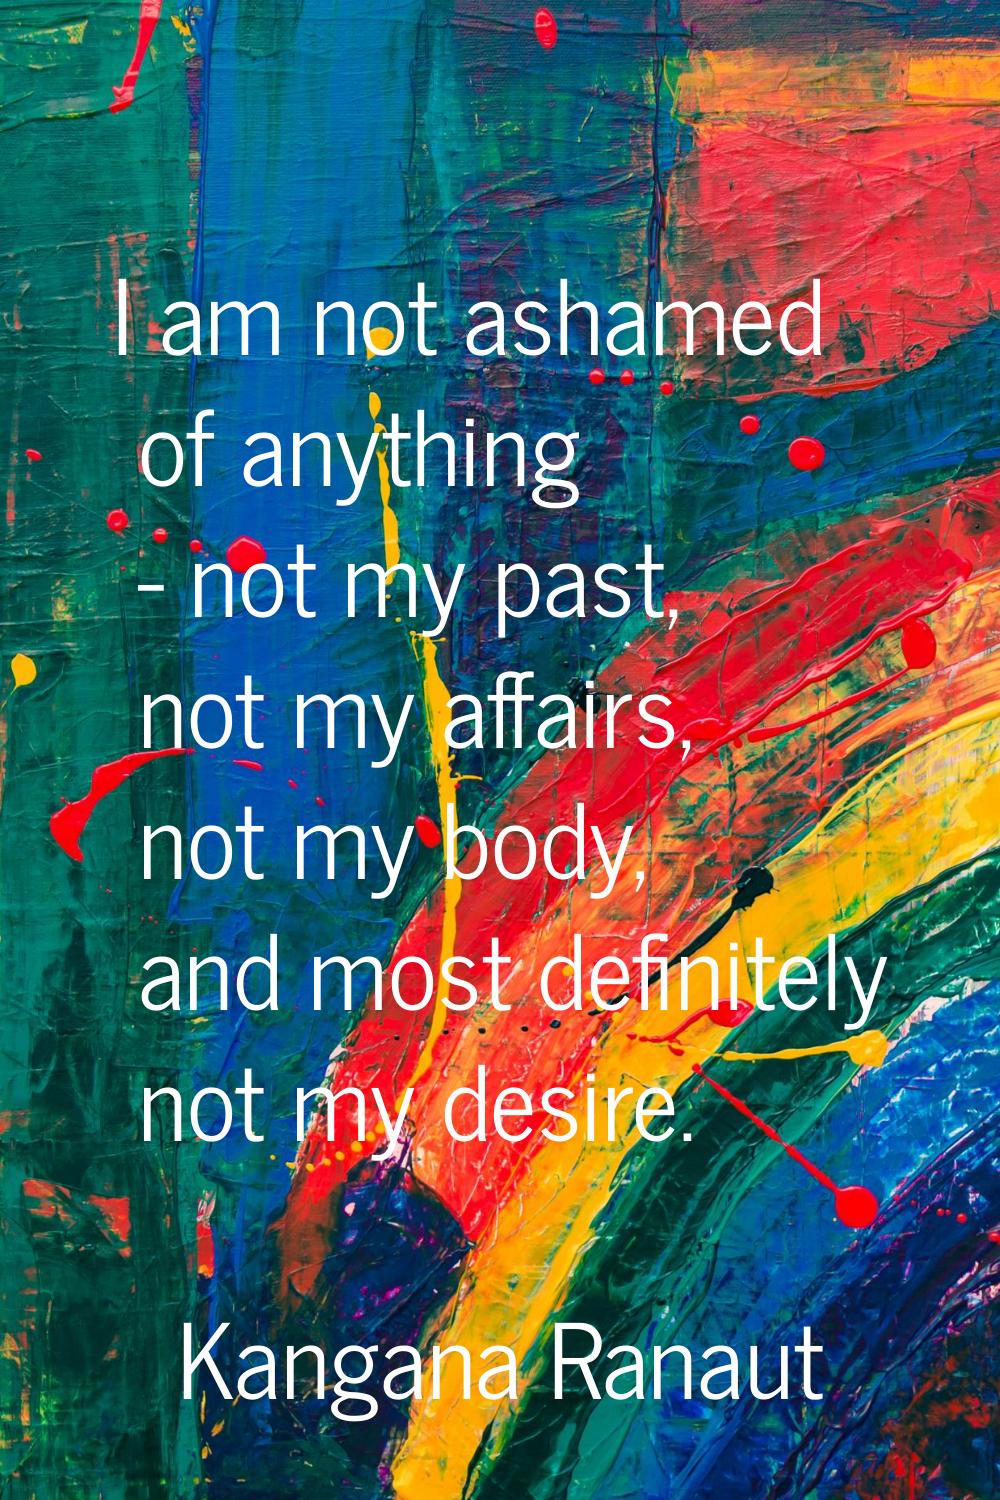 I am not ashamed of anything - not my past, not my affairs, not my body, and most definitely not my